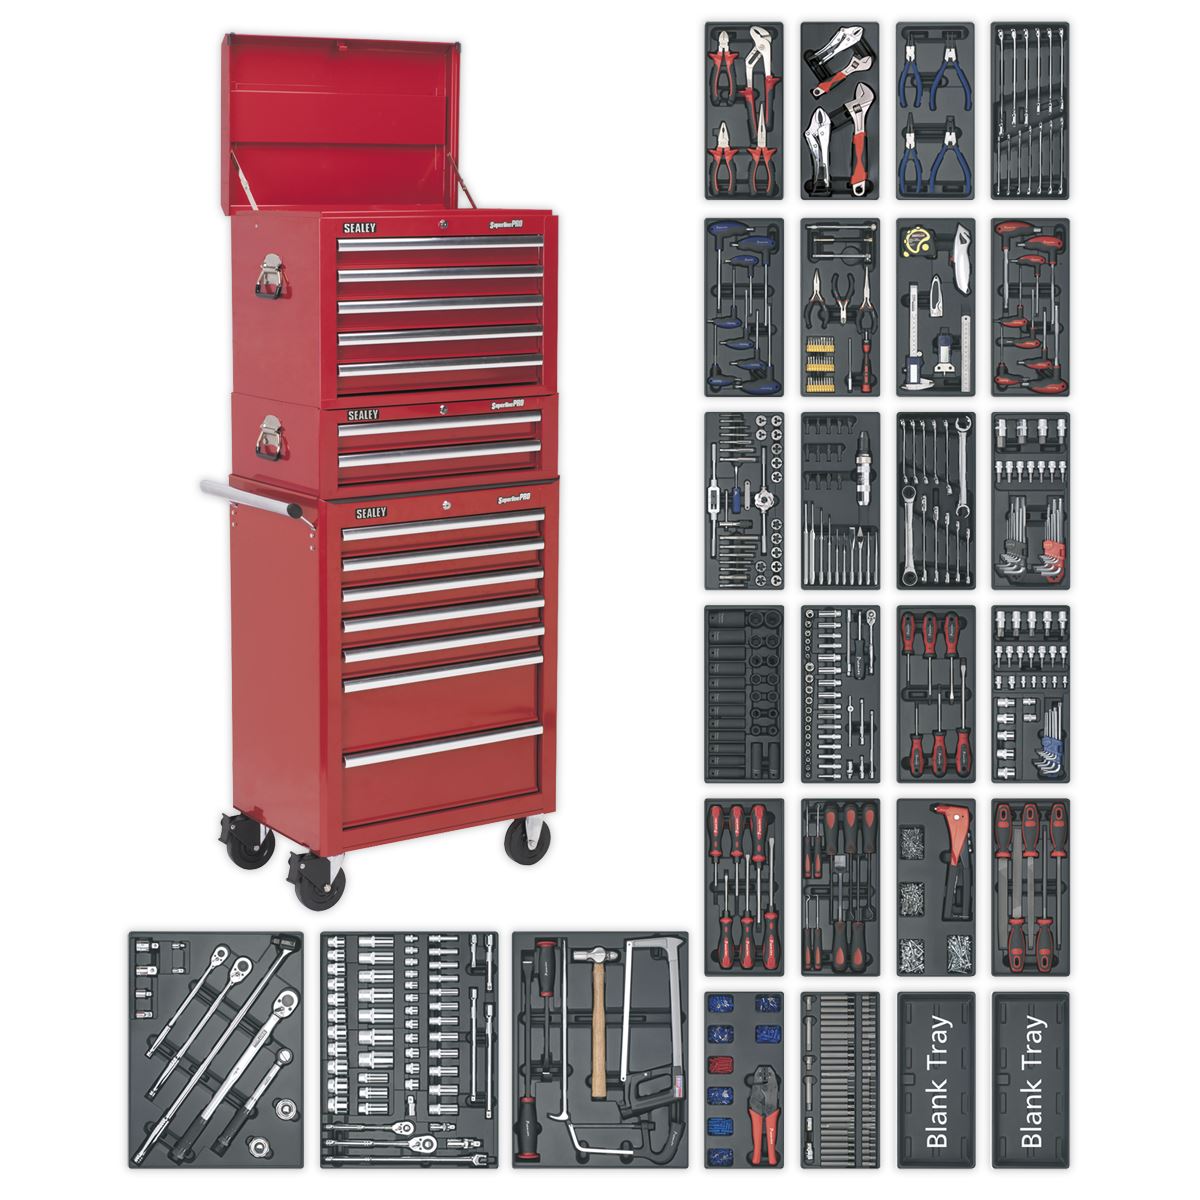 Sealey Superline Pro Tool Chest Combination 14 Drawer with Ball-Bearing Slides - Red & 1179pc Tool Kit